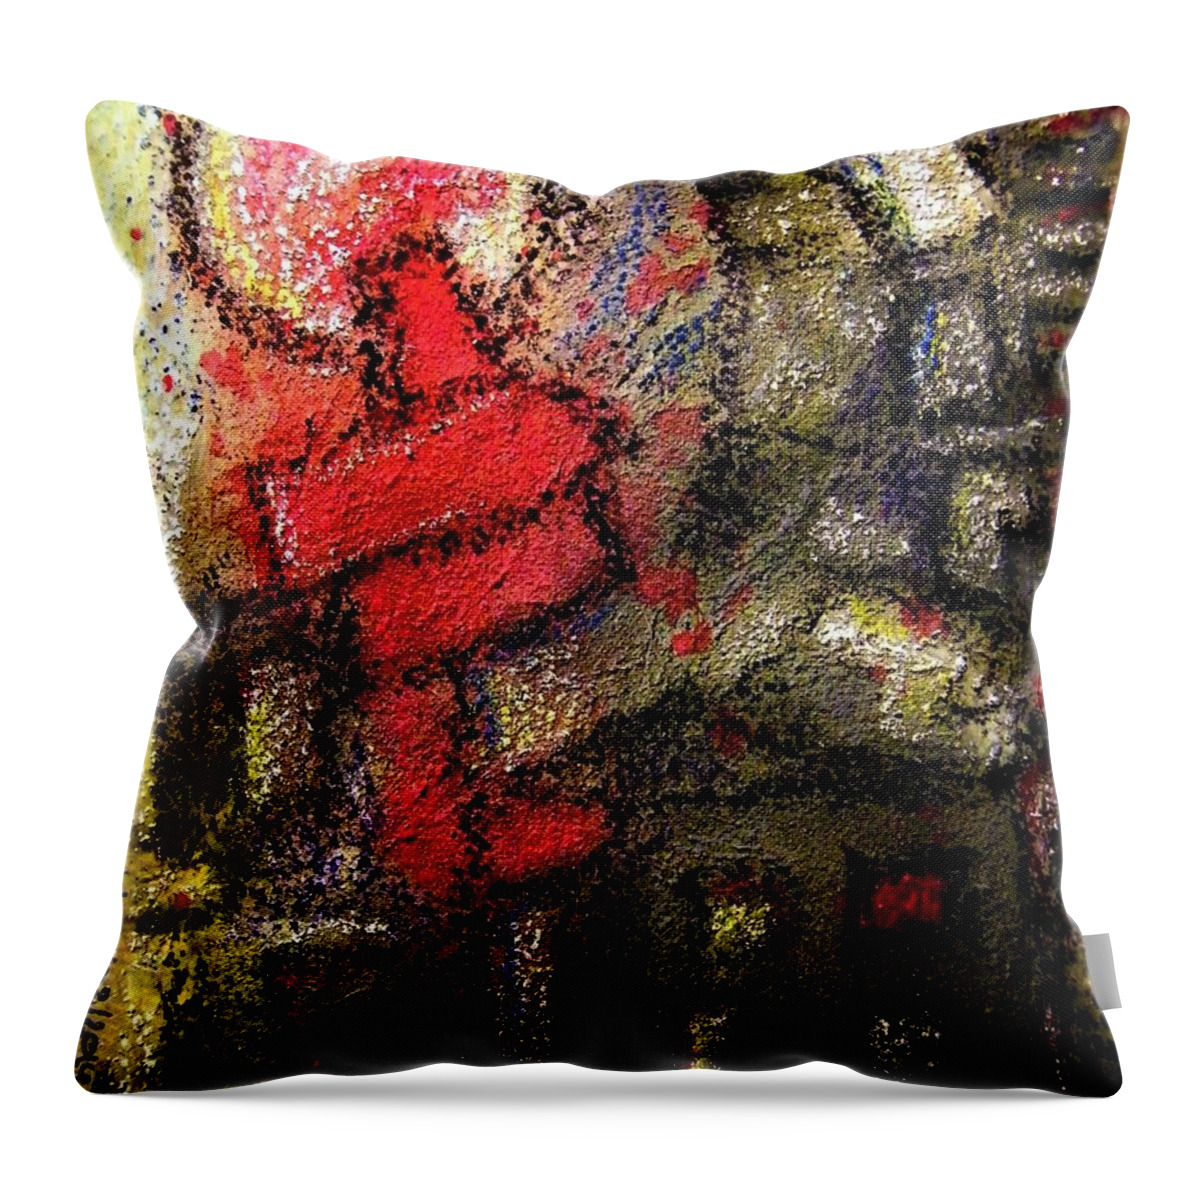 Chimney Throw Pillow featuring the painting Red Chimney - Roter Schornstein by Mimulux Patricia No